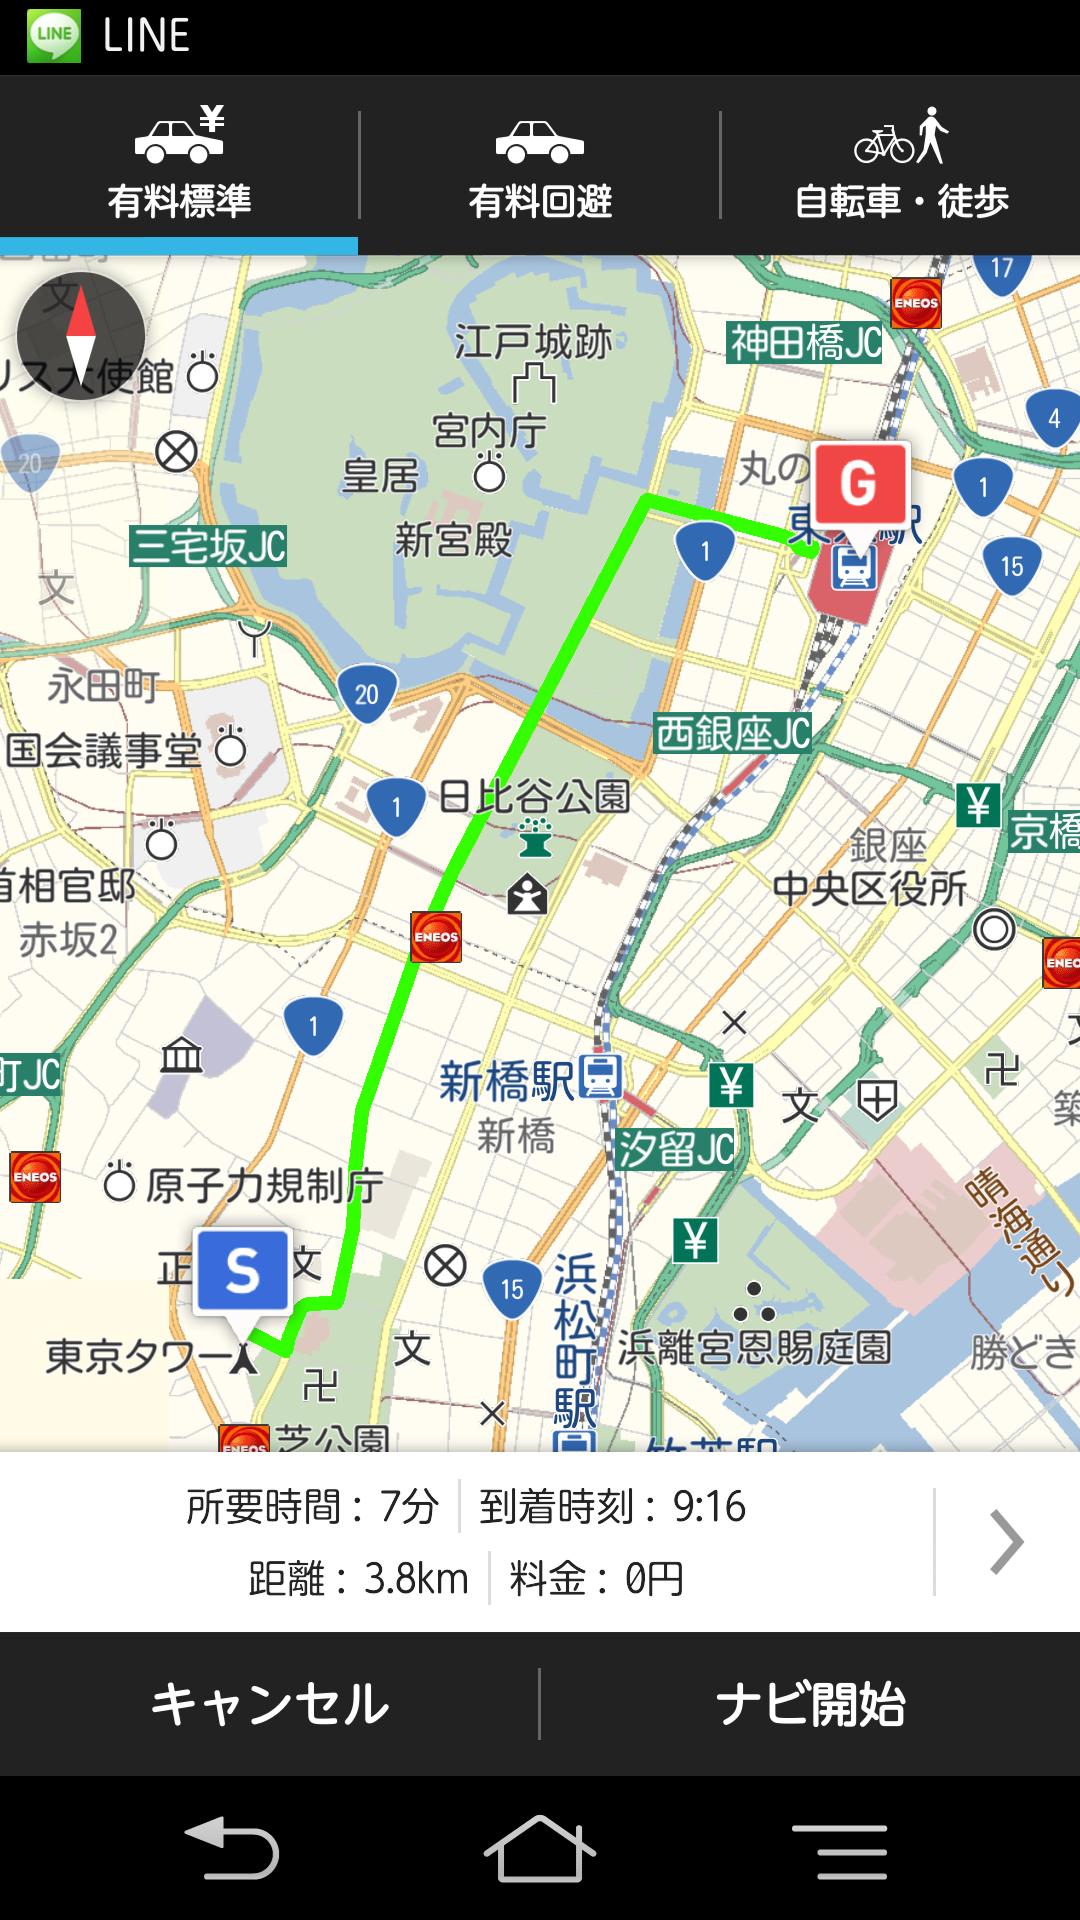 MapFan for Android 2013